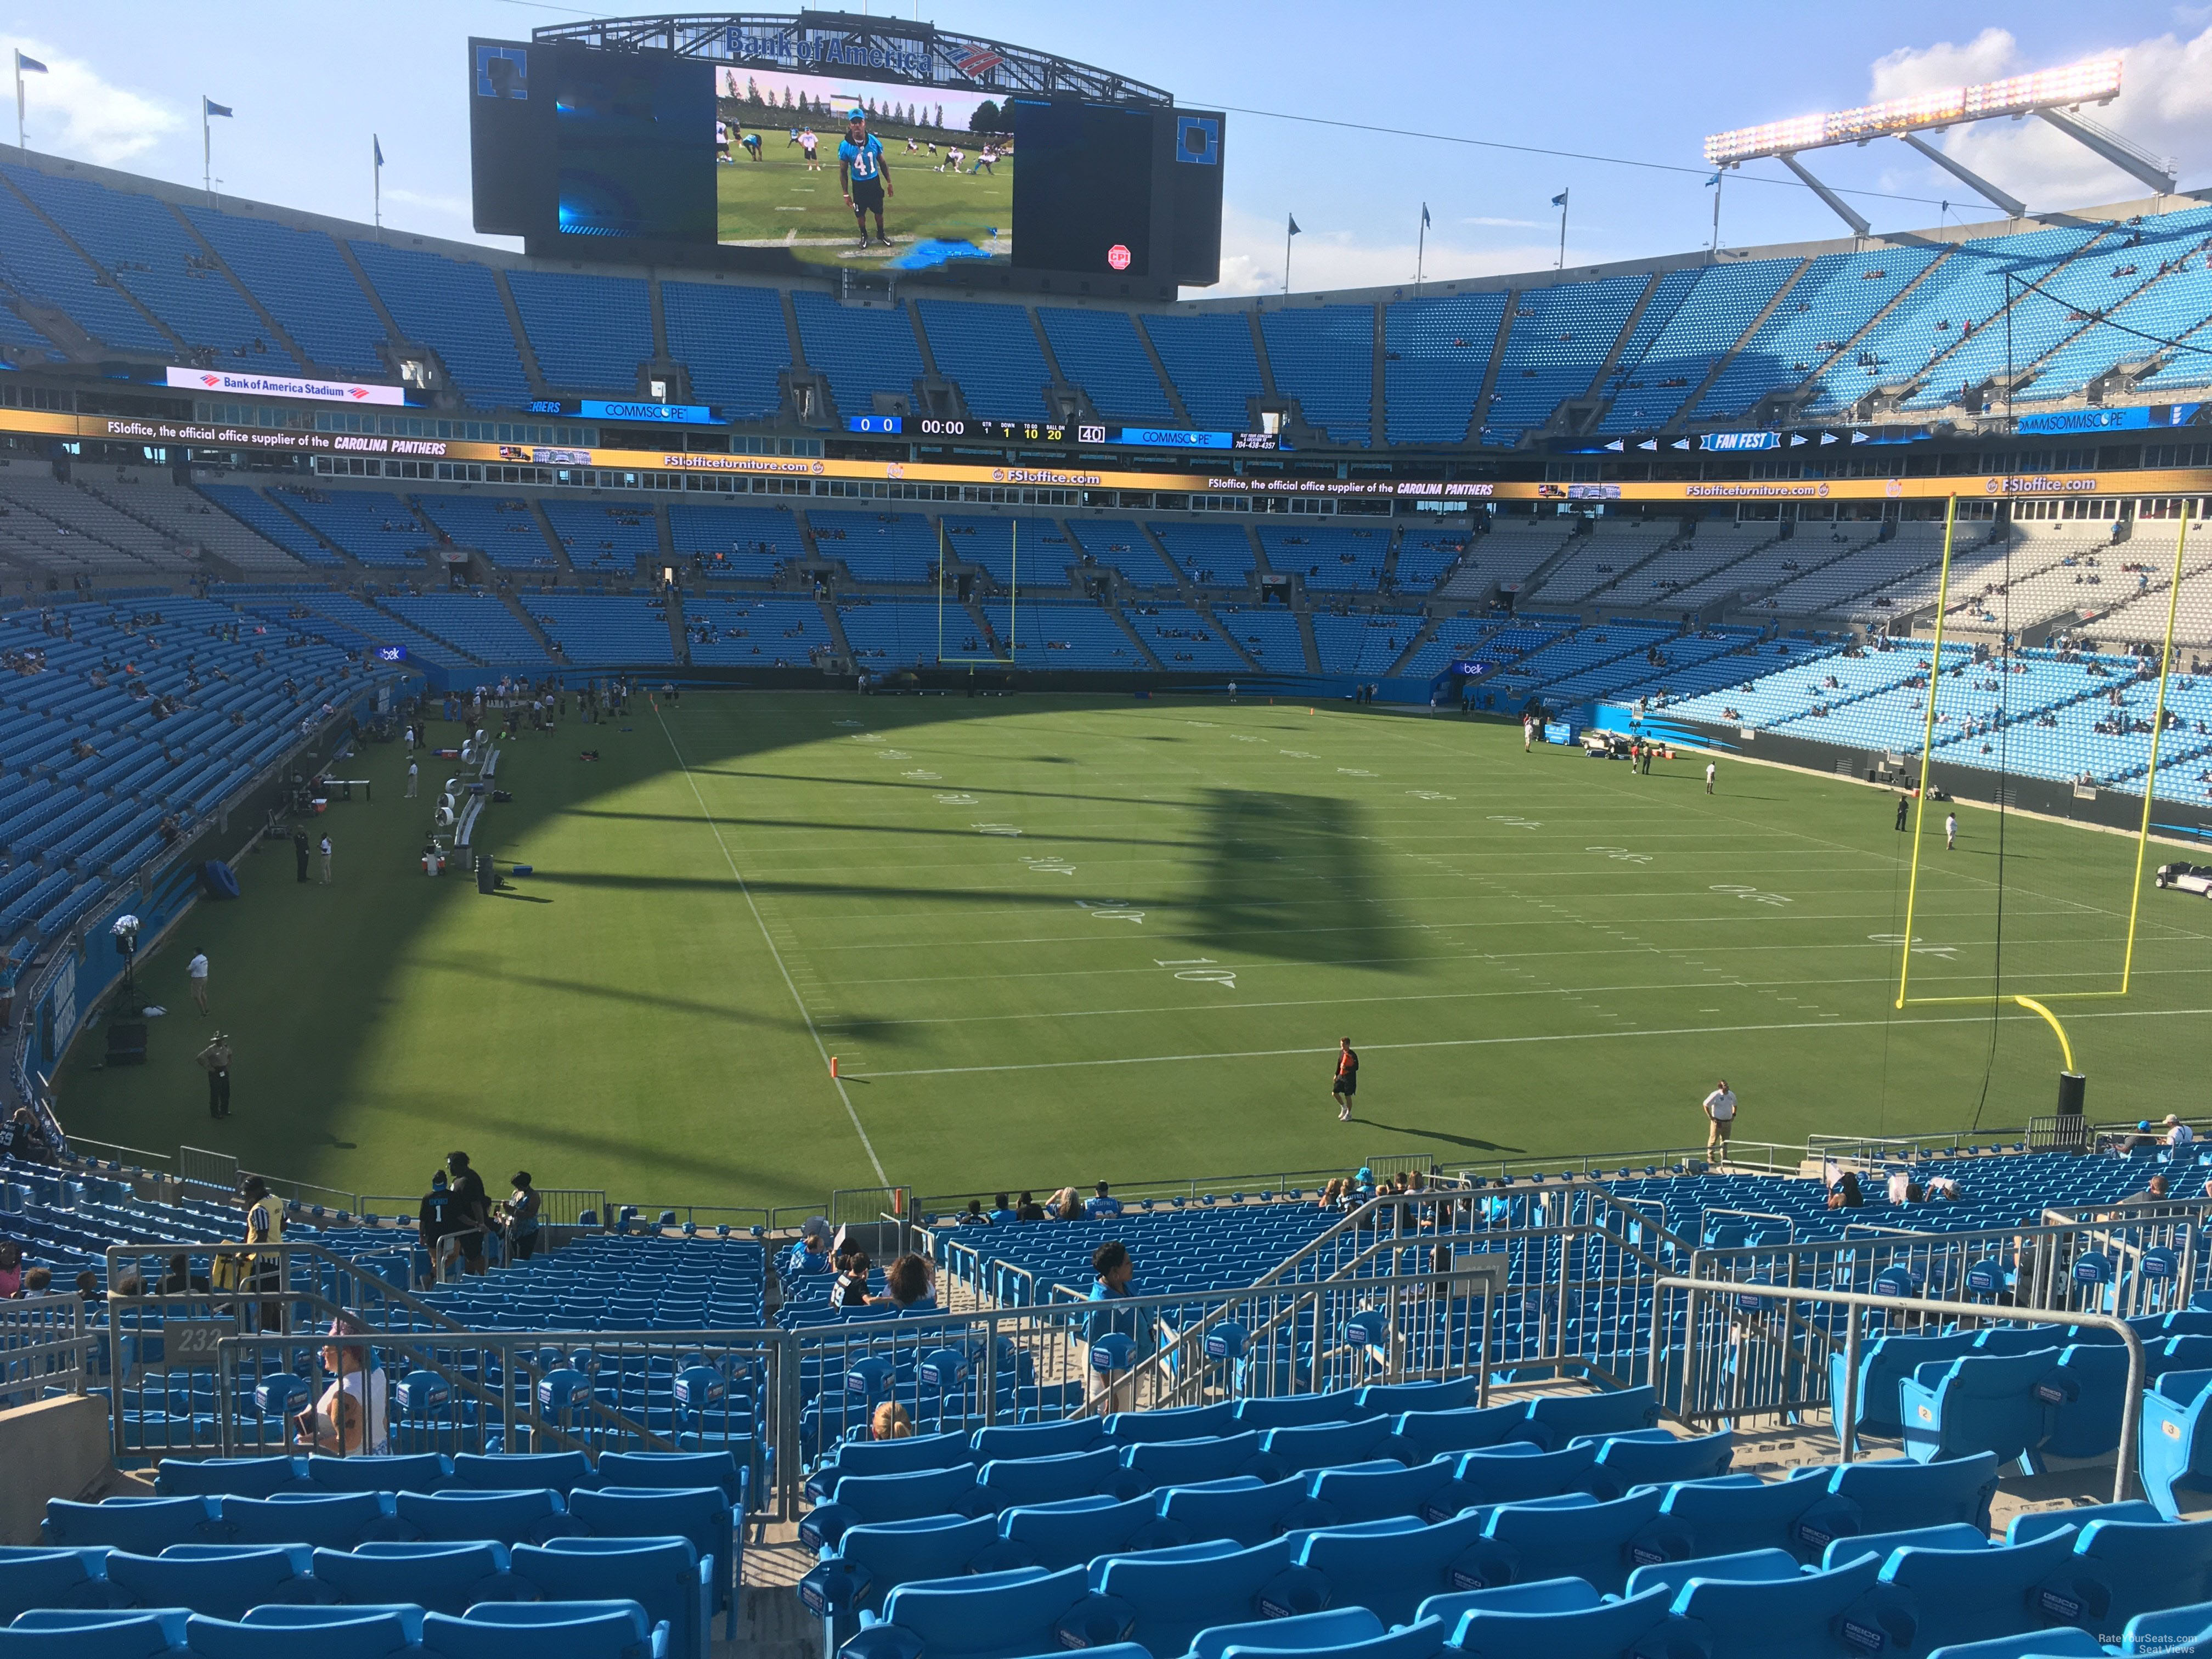 section 232, row 10 seat view  for football - bank of america stadium